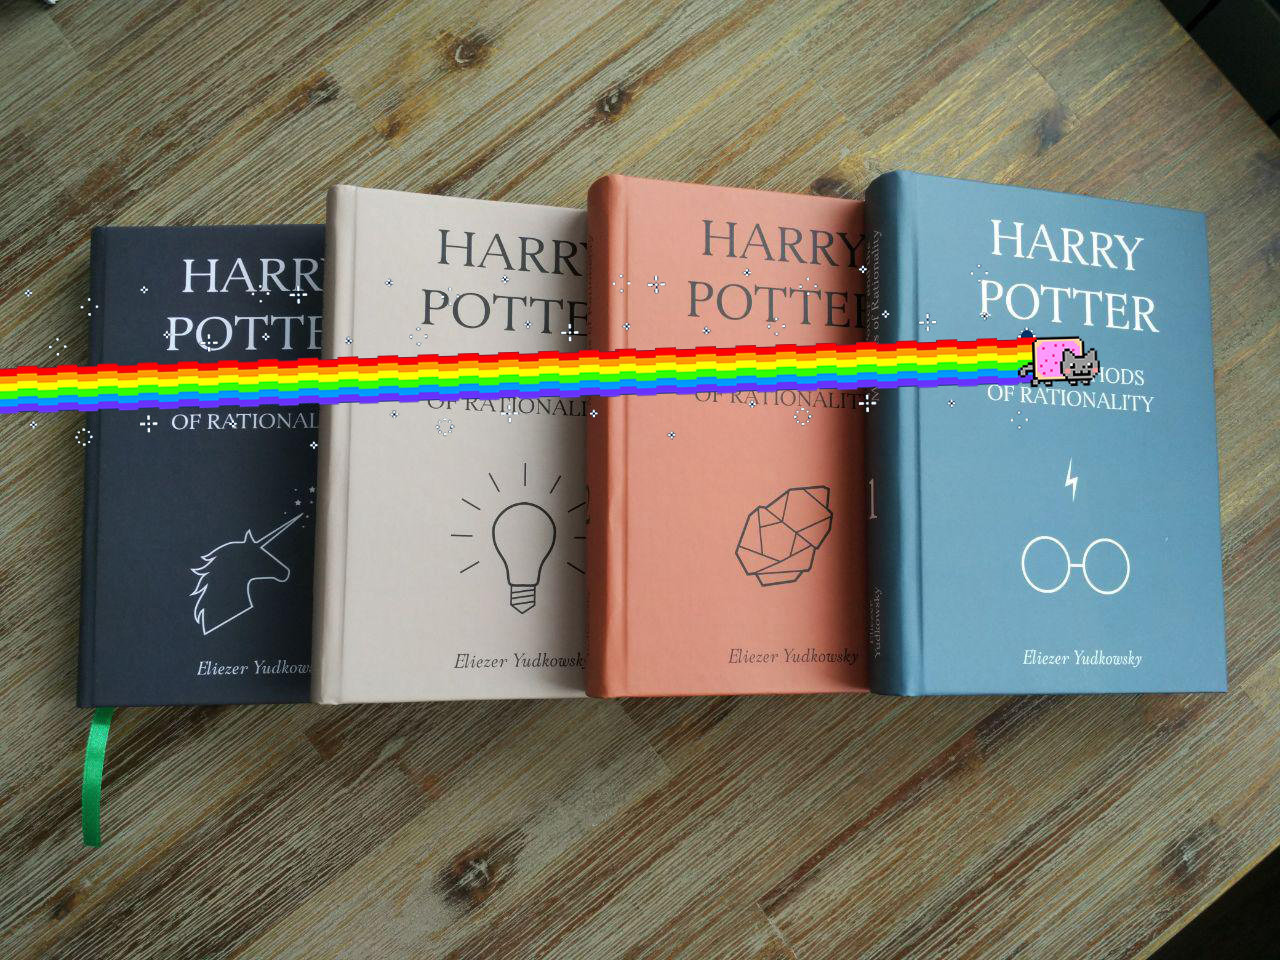 Harry Potter and the Methods of Rationality (HPMoR) EN hardcover edition - Crowdsourced printing, I want my books: economy small batch printing (~4-6 weeks)